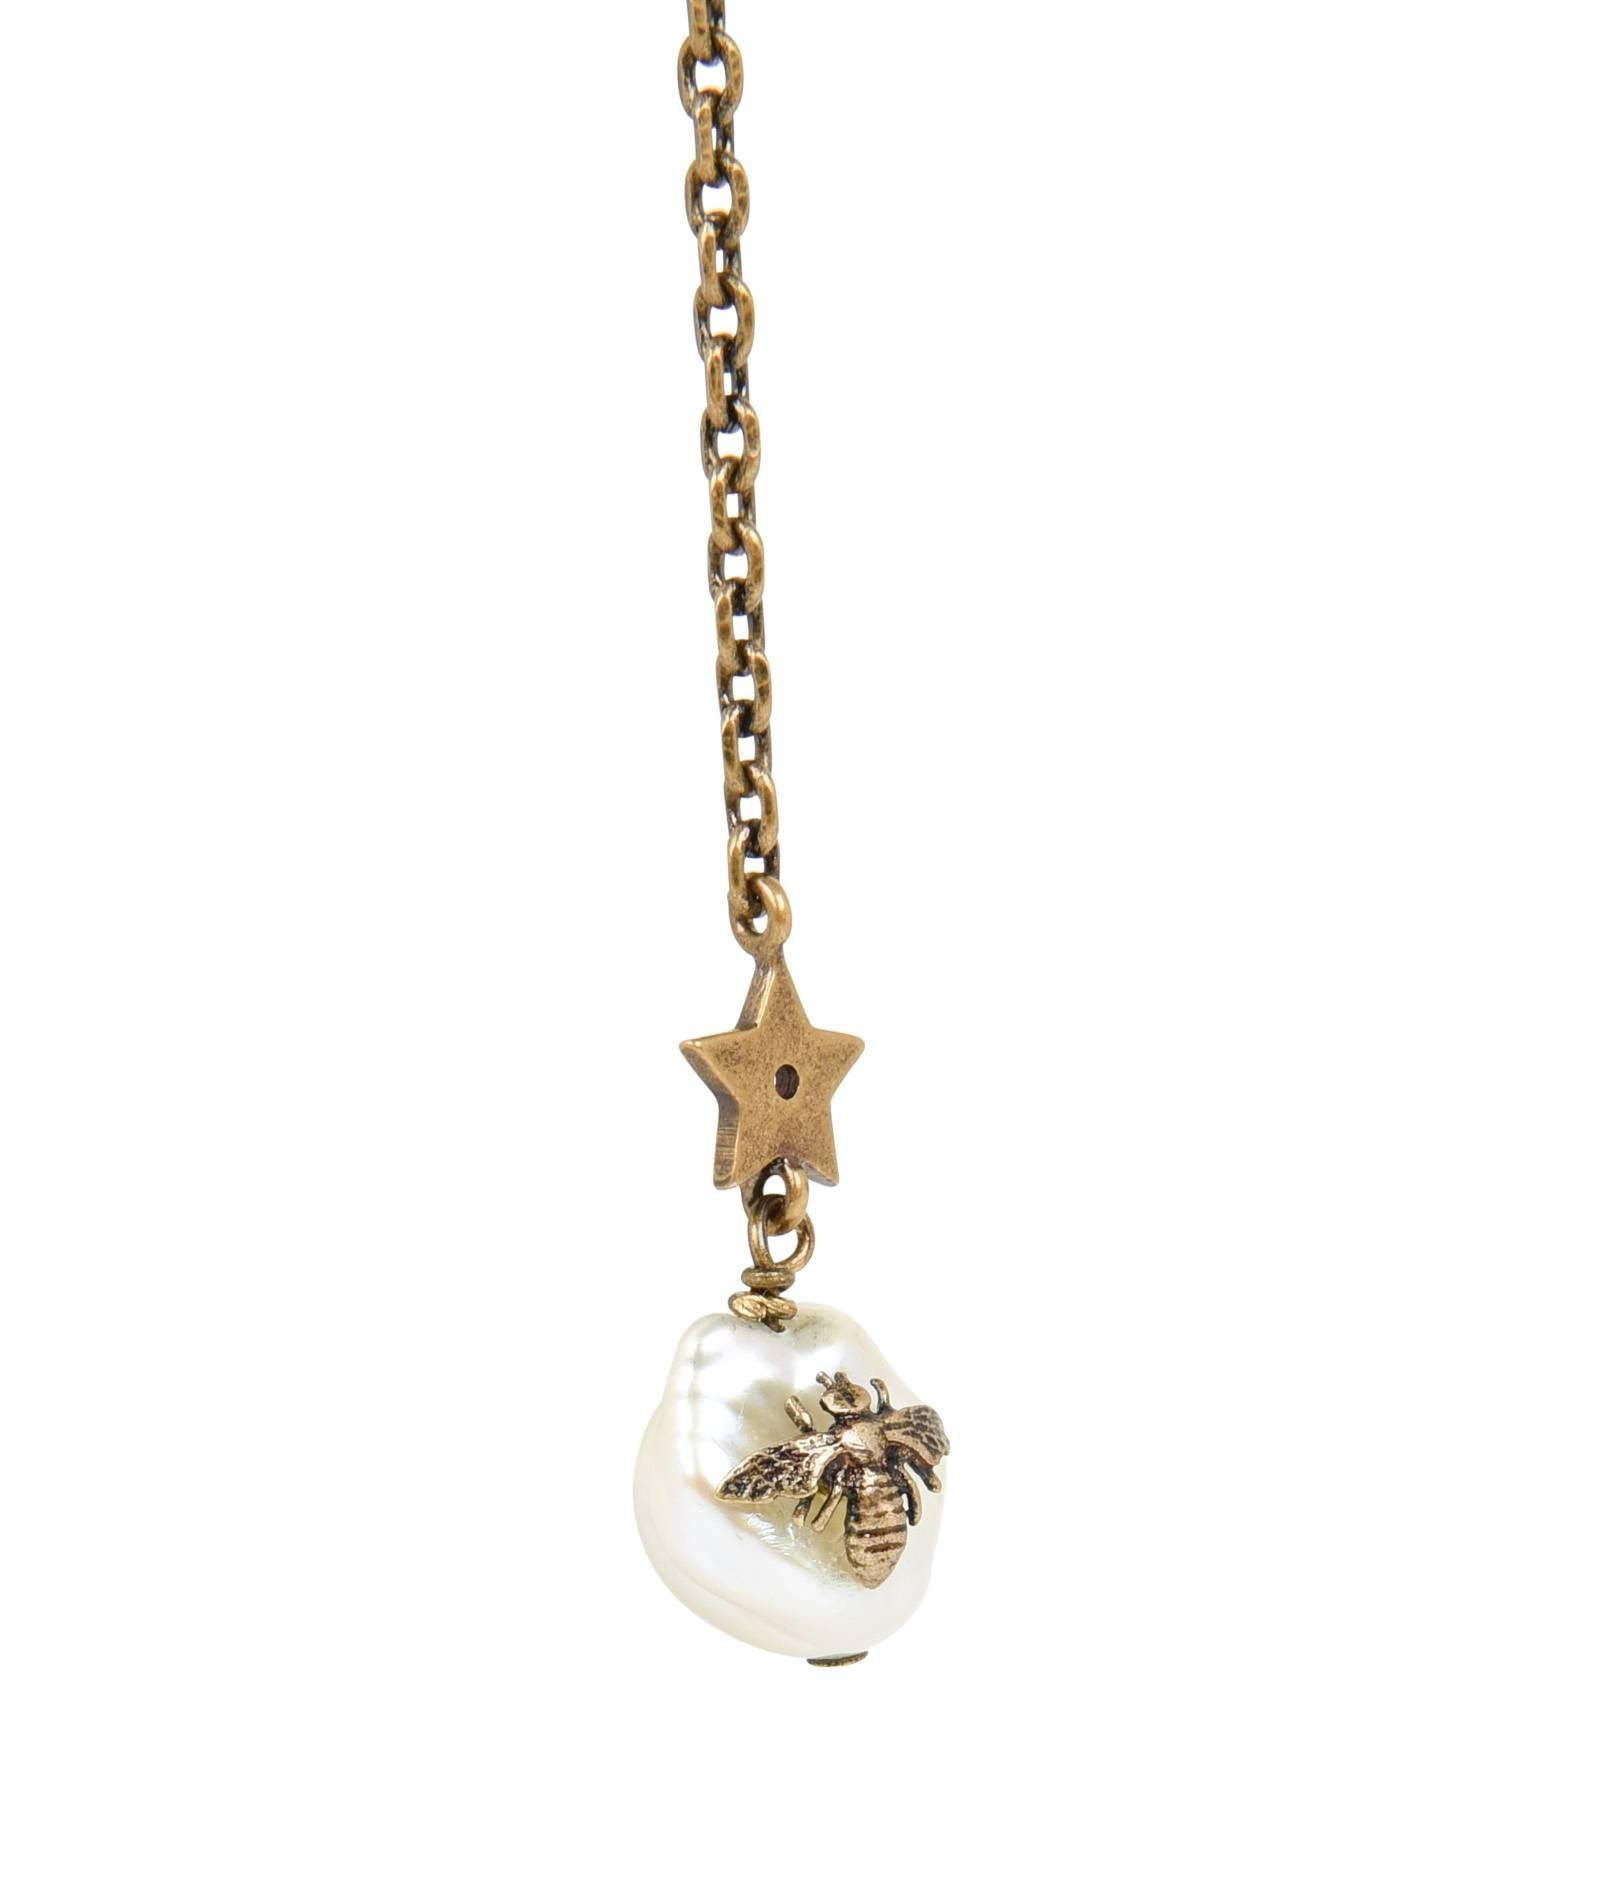 Mightychic offers a Christian Dior antiqued gold toned lariat Y necklace.
Fresh water pearls interspersed with antiqued gold stars and CD logo.
The last pearl on the lariat has an antiqued gold bee on it.  
Logo embossed metal CD charm at closure